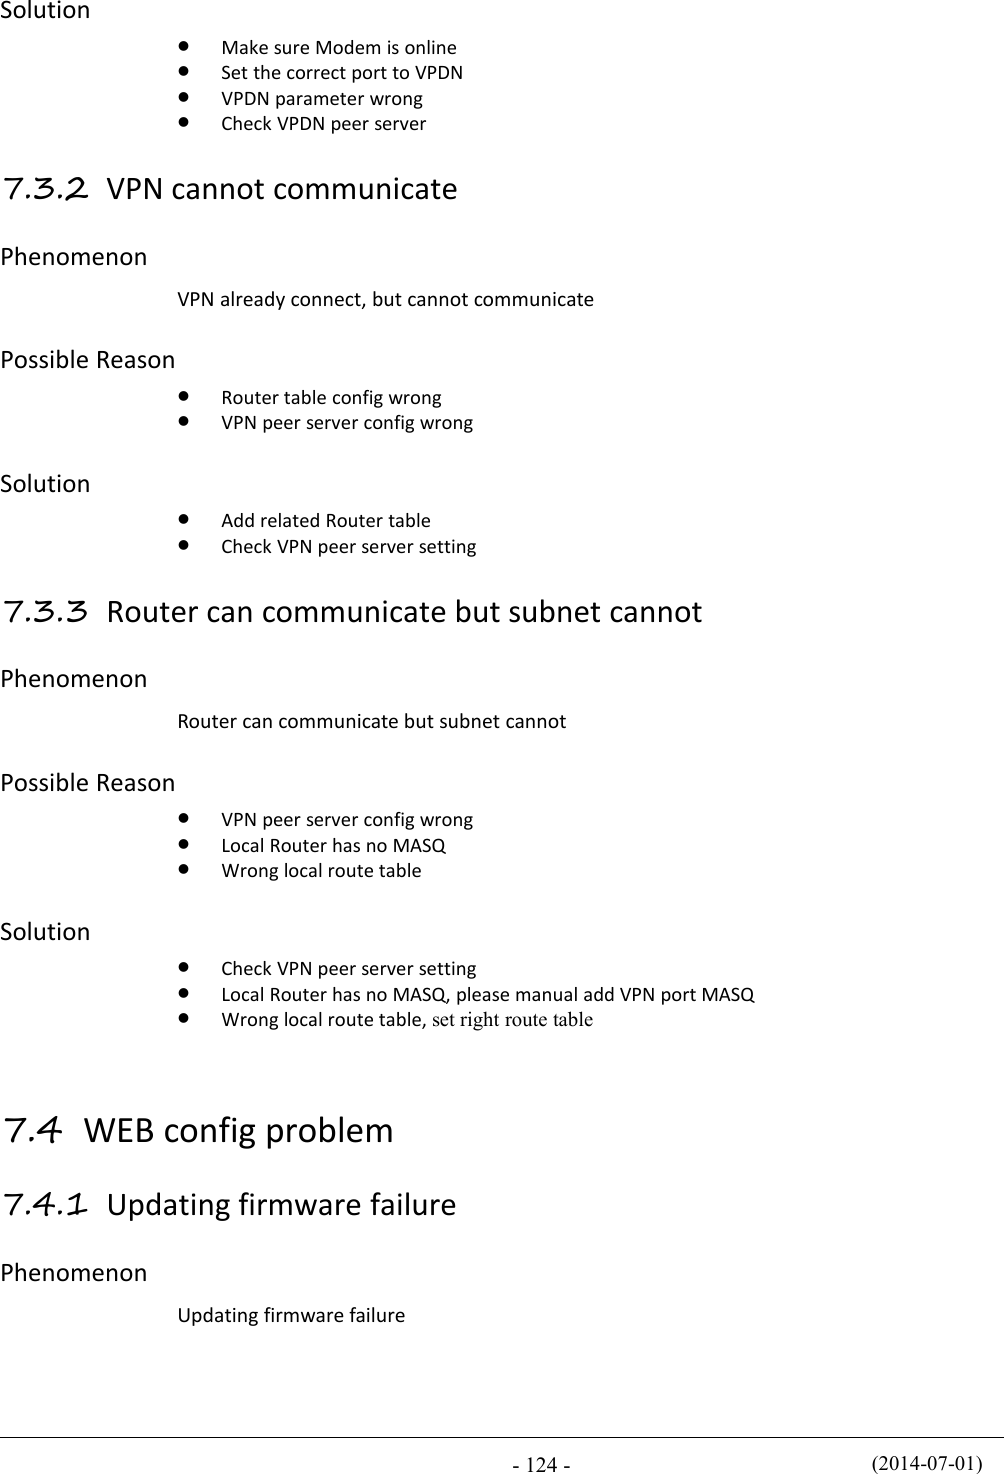 (2014-07-01)- 124 -SolutionMake sure Modem is onlineSet the correct port to VPDNVPDN parameter wrongCheck VPDN peer server7.3.2 VPN cannot communicatePhenomenonVPN already connect, but cannot communicatePossible ReasonRouter table config wrongVPN peer server config wrongSolutionAdd related Router tableCheck VPN peer server setting7.3.3 Router can communicate but subnet cannotPhenomenonRouter can communicate but subnet cannotPossible ReasonVPN peer server config wrongLocal Router has no MASQWrong local route tableSolutionCheck VPN peer server settingLocal Router has no MASQ, please manual add VPN port MASQWrong local route table, set right route table7.4 WEB config problem7.4.1 Updating firmware failurePhenomenonUpdating firmware failure